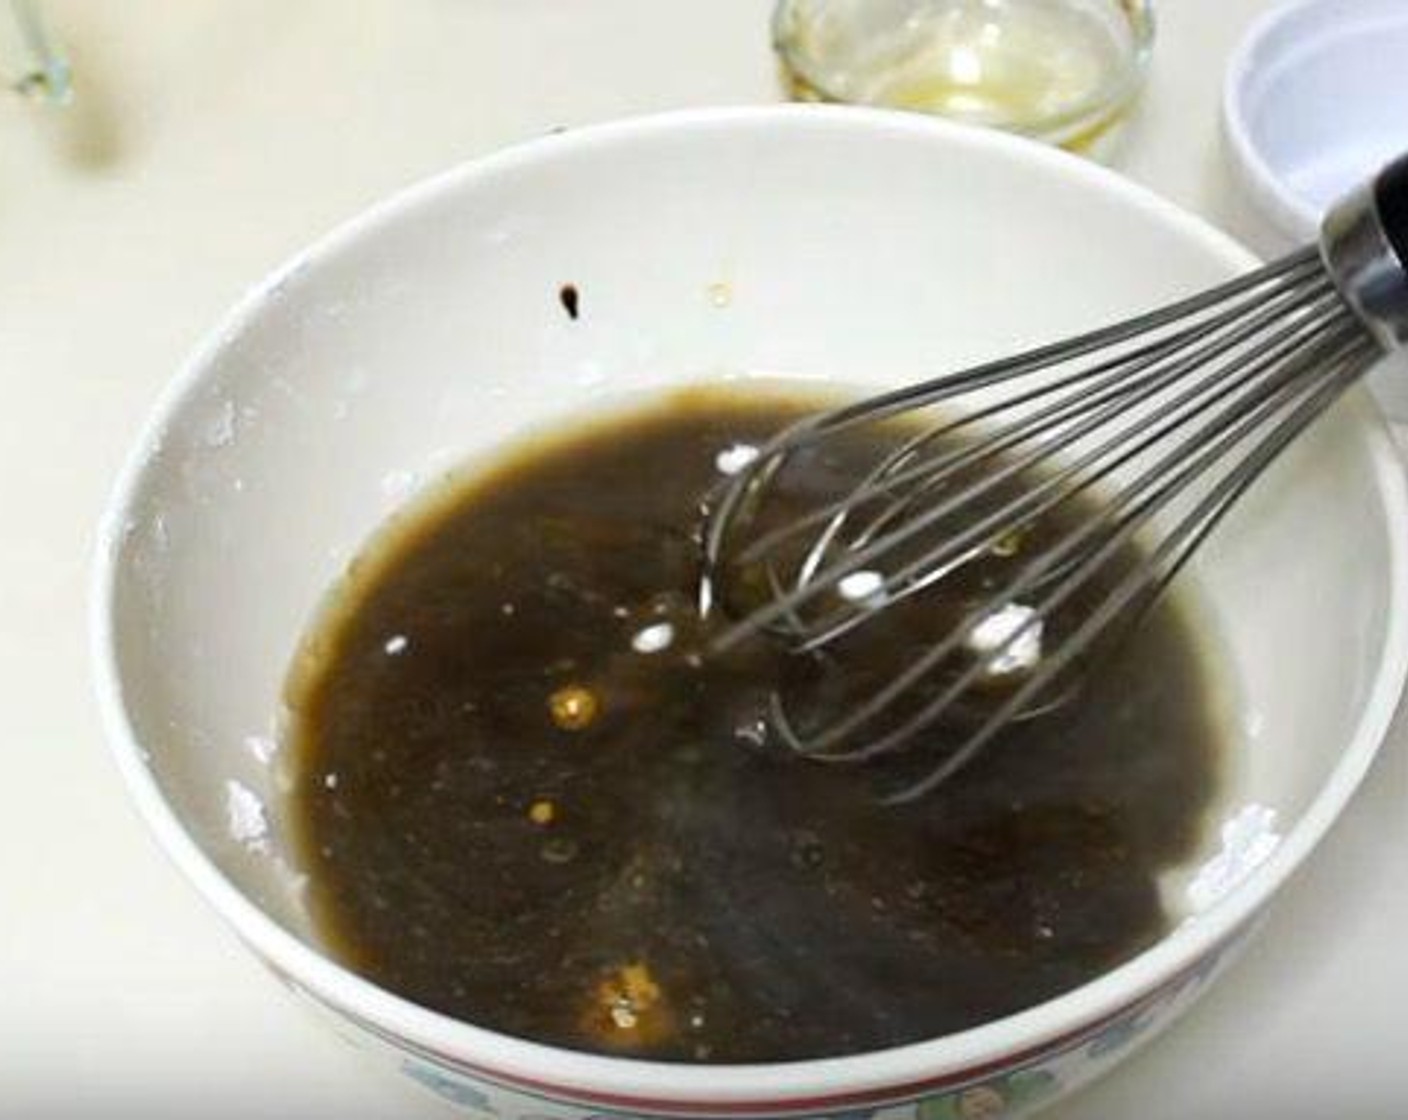 step 3 In the same bowl you had your chicken and flour, add Chicken Broth (1 cup), Garlic (2 cloves), Ground Ginger (1 tsp), Soy Sauce (1/4 cup), and Honey (3 Tbsp). Whisk together and set aside.